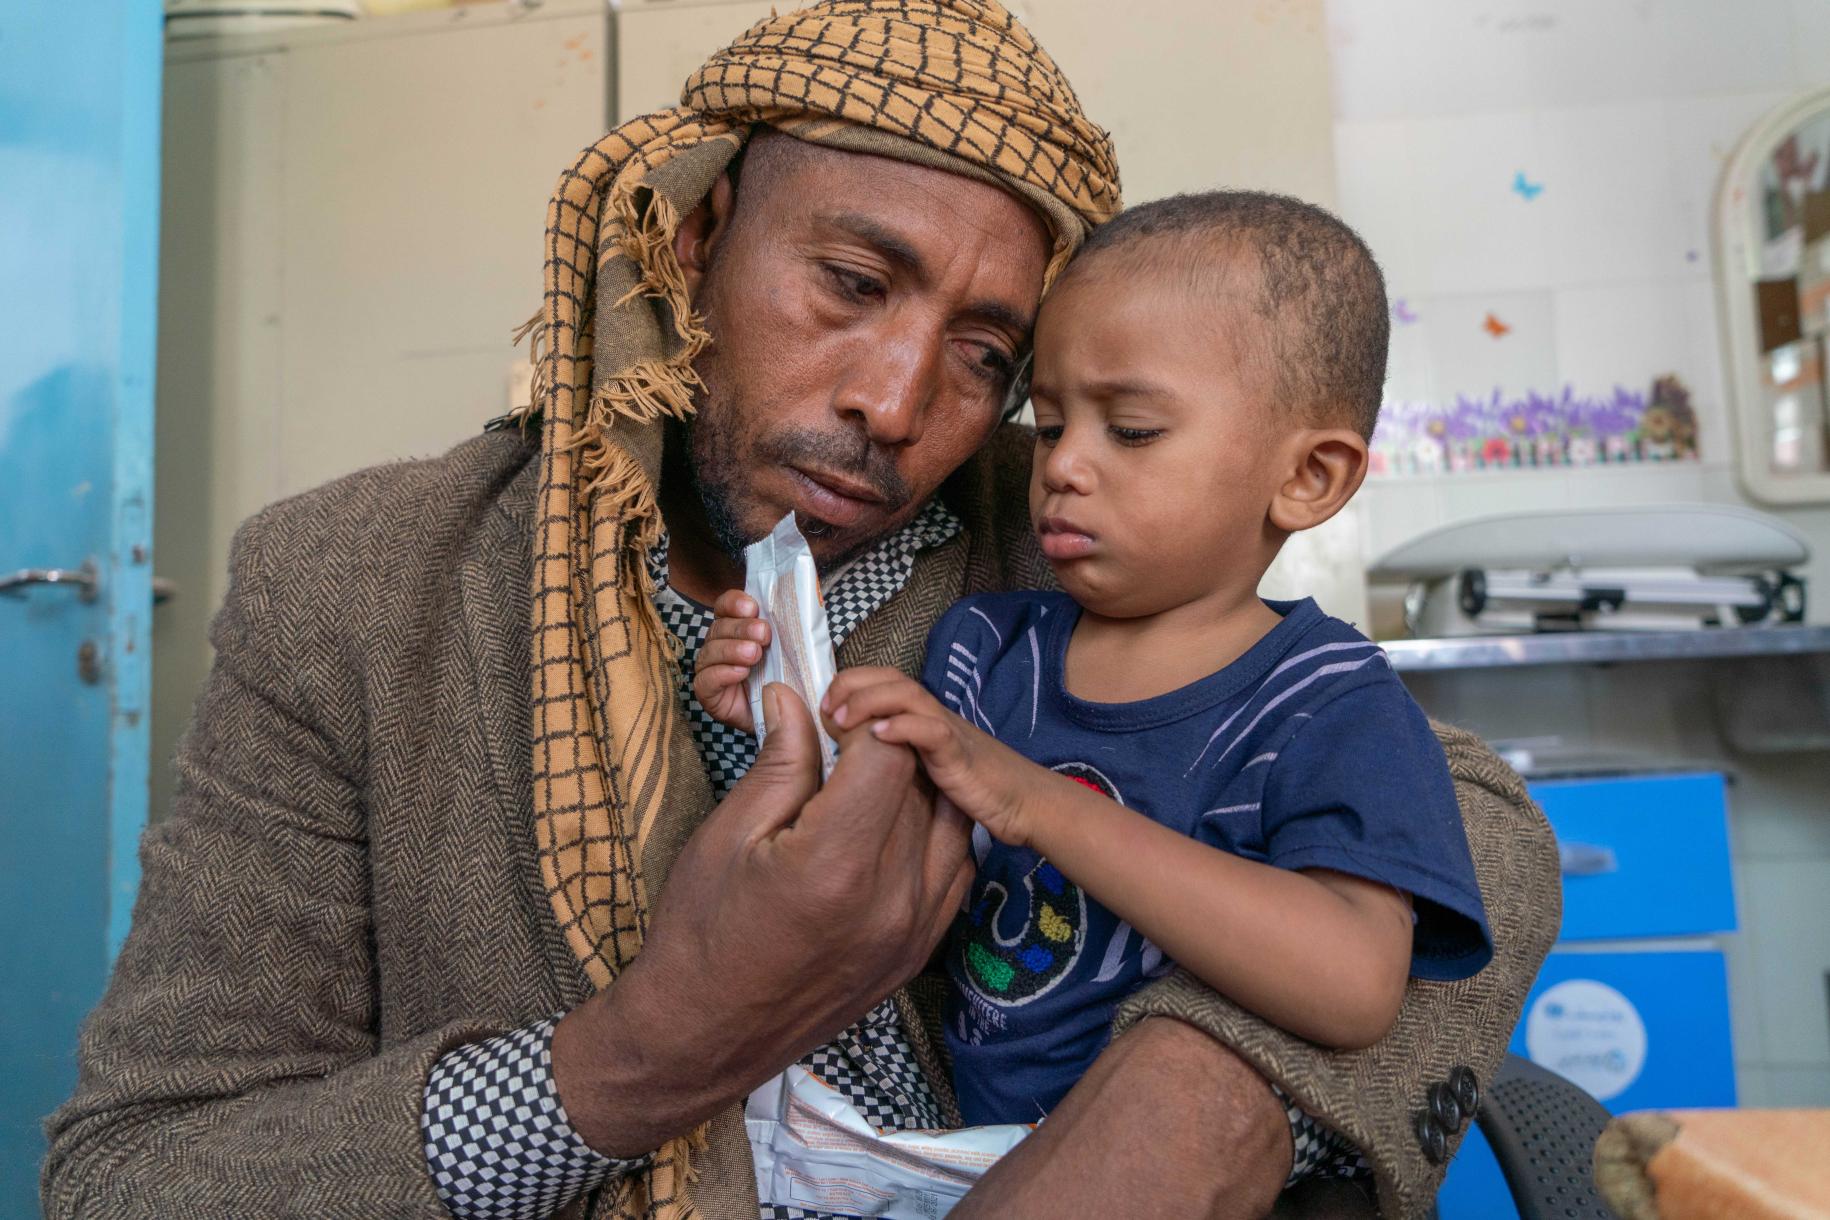 Sultan (1 year and 9 months) who suffers from moderate malnutrition receives nutrition supplies (Plumpy sup) at WFP supported health clinic in Amant Al Asimah with his father, Arafat (37), who is lovingly looking at his son. 